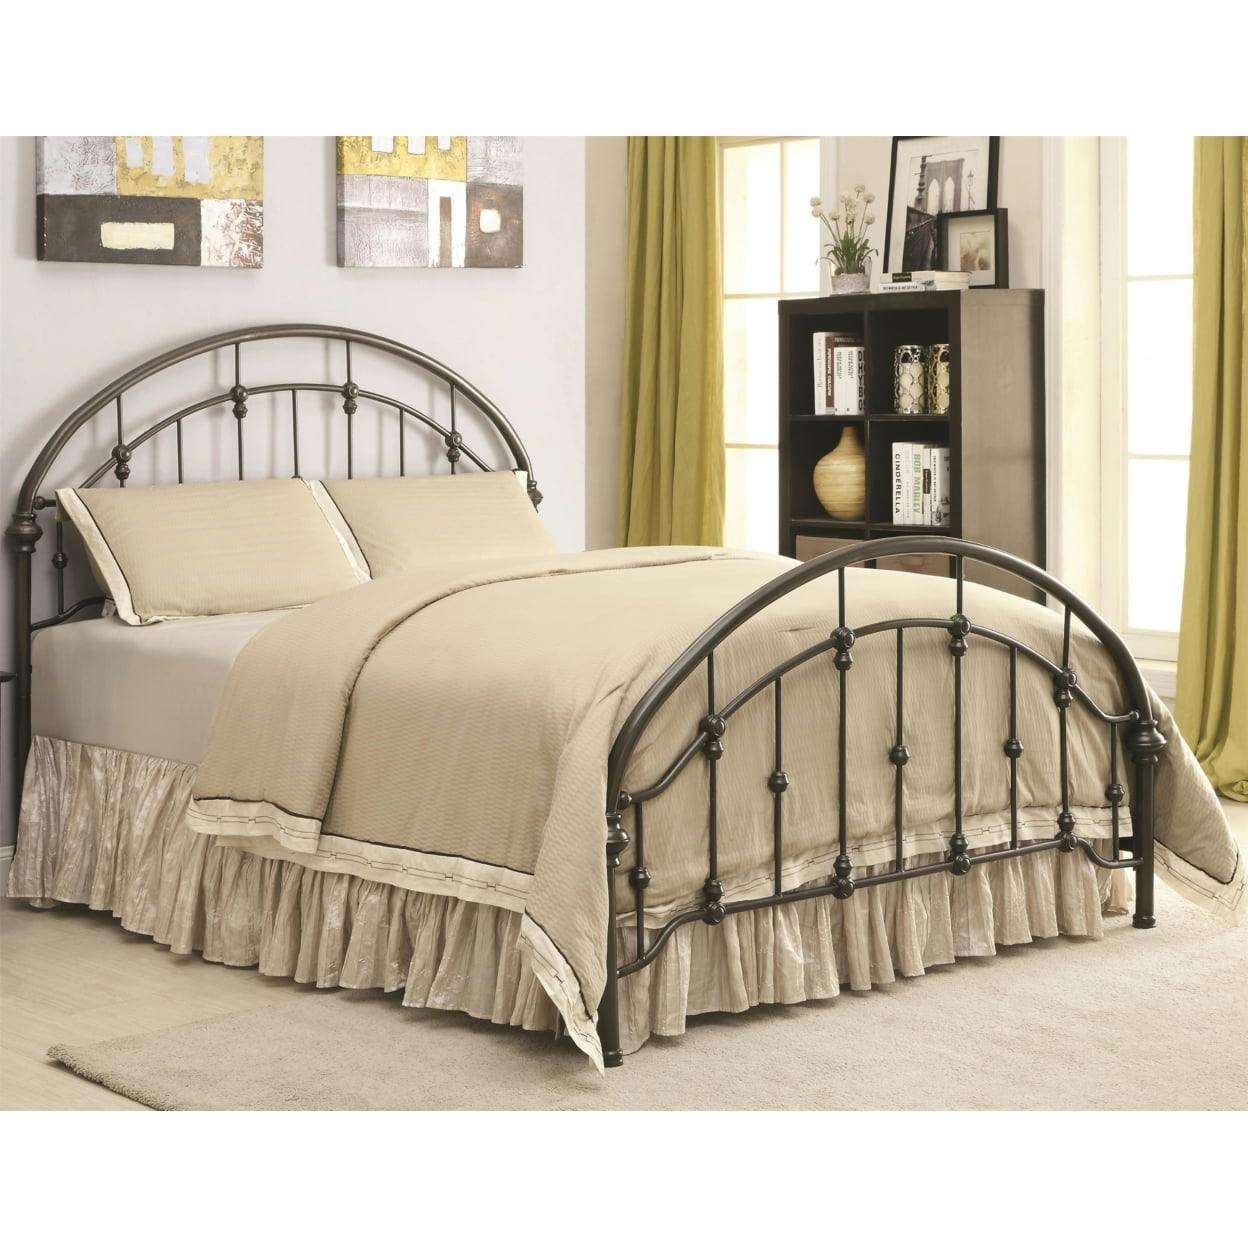 Transitional Rowan Full Metal Bed with Arched Headboard in Dark Bronze